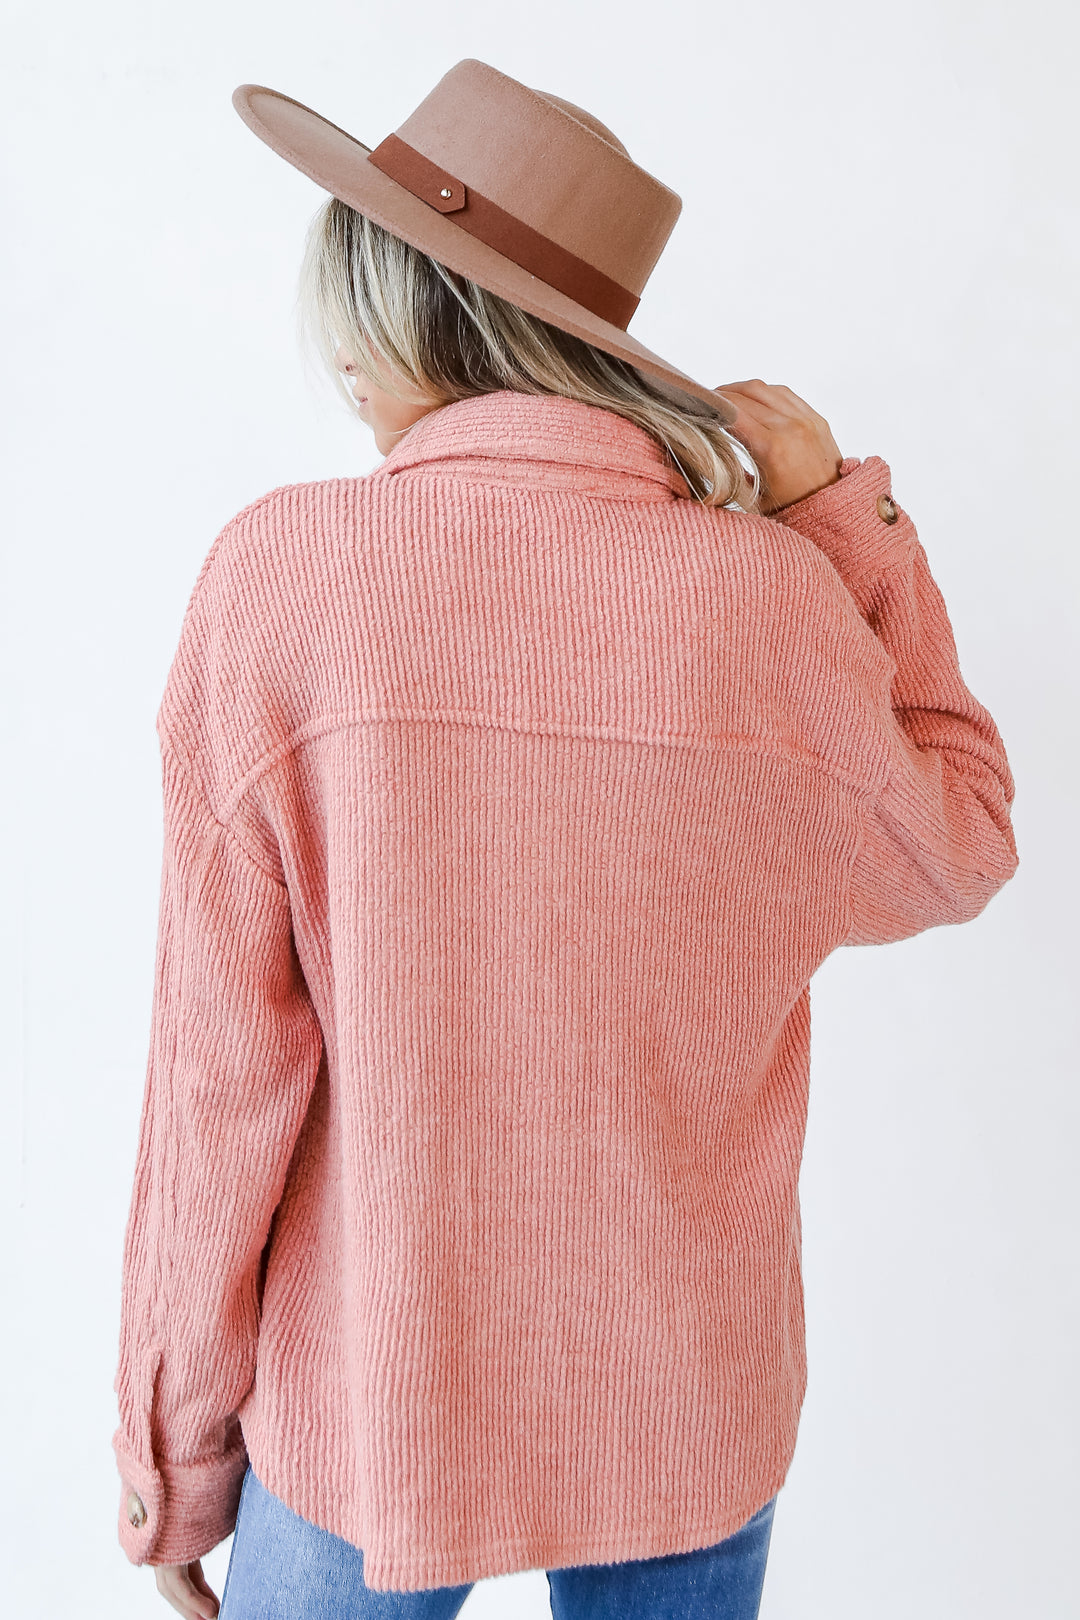 Corded Shacket in blush back view